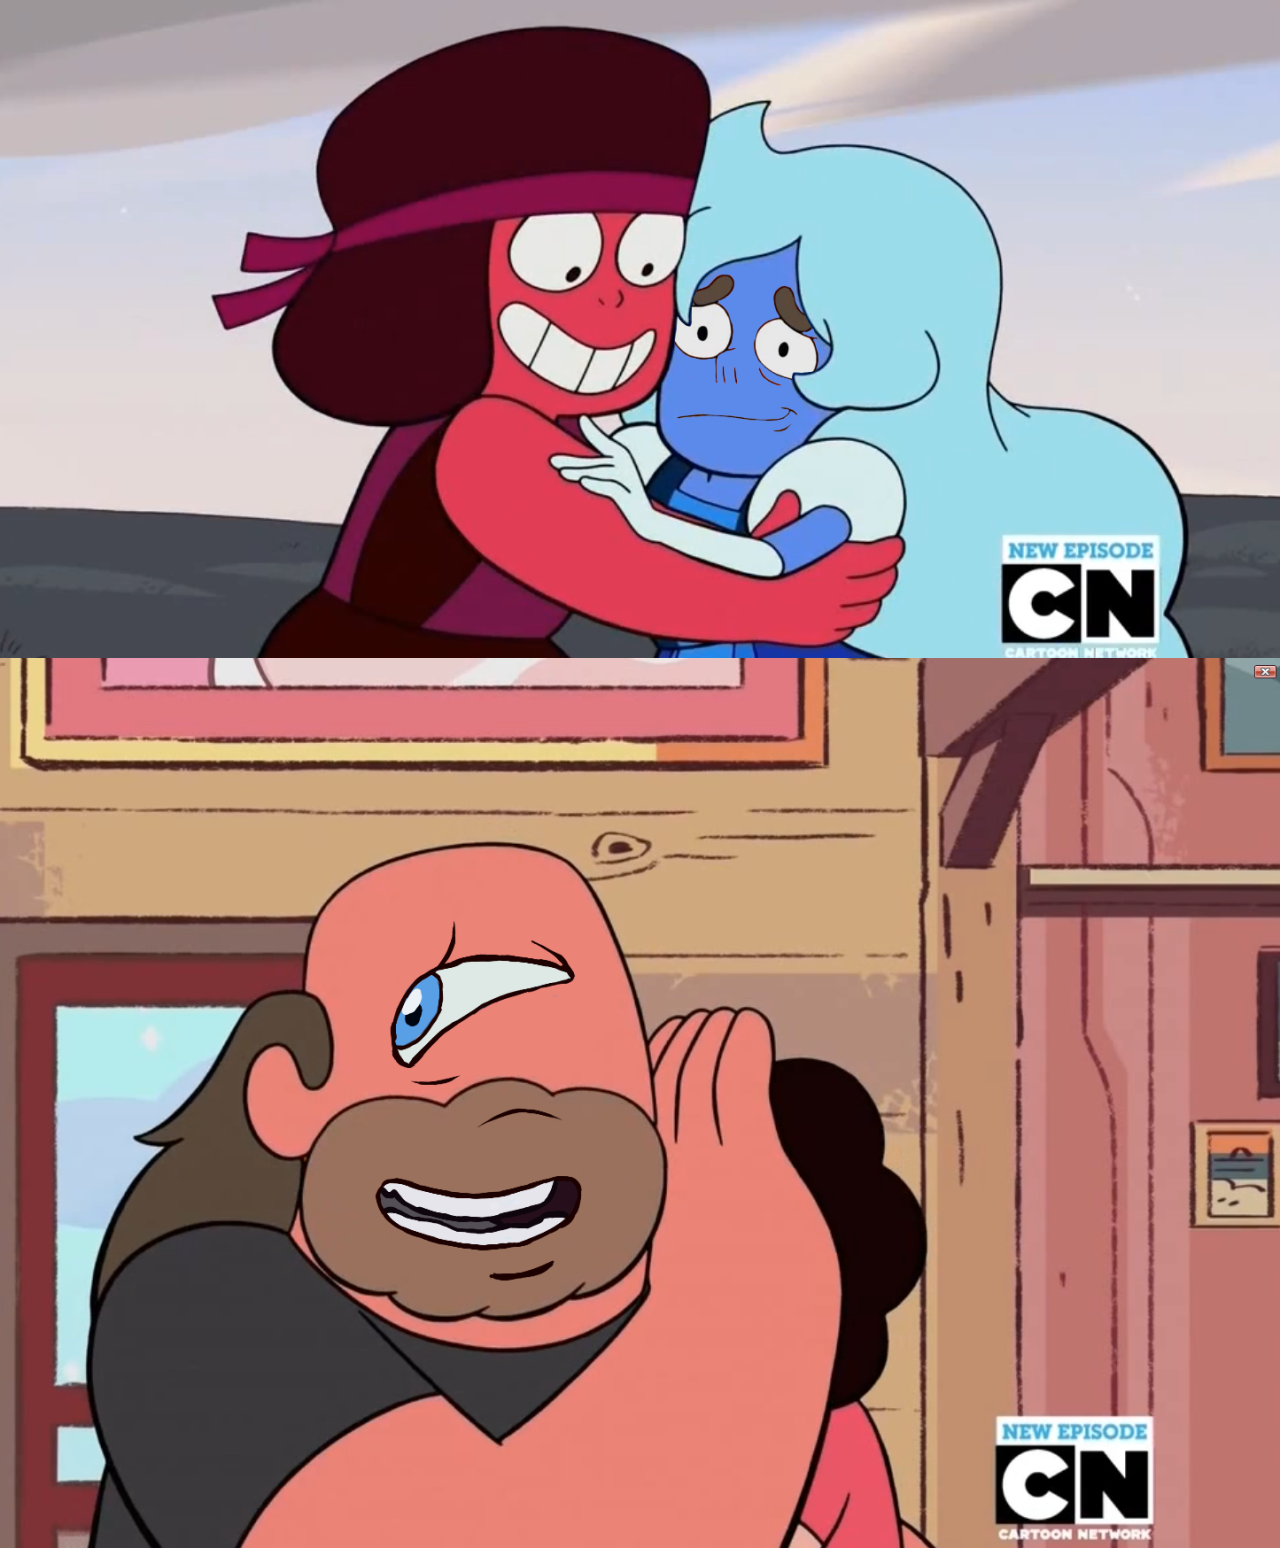 So I was doing some face swaps and my brother said I should do Greg and Sapphire